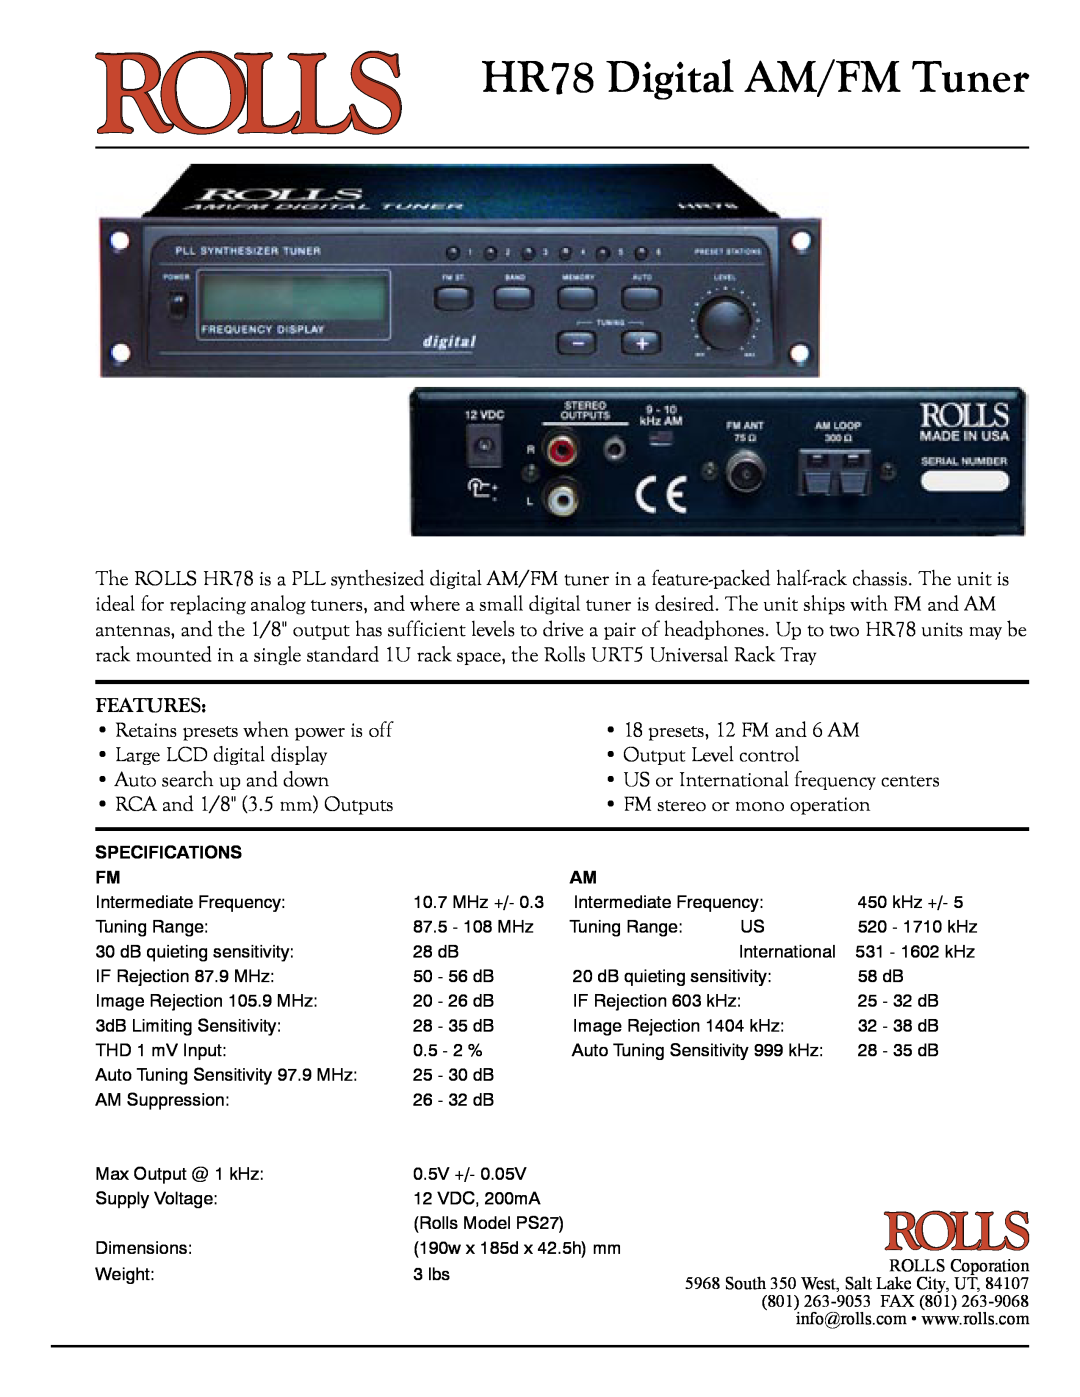 Rolls specifications HR78 Digital AM/FM Tuner, Features 